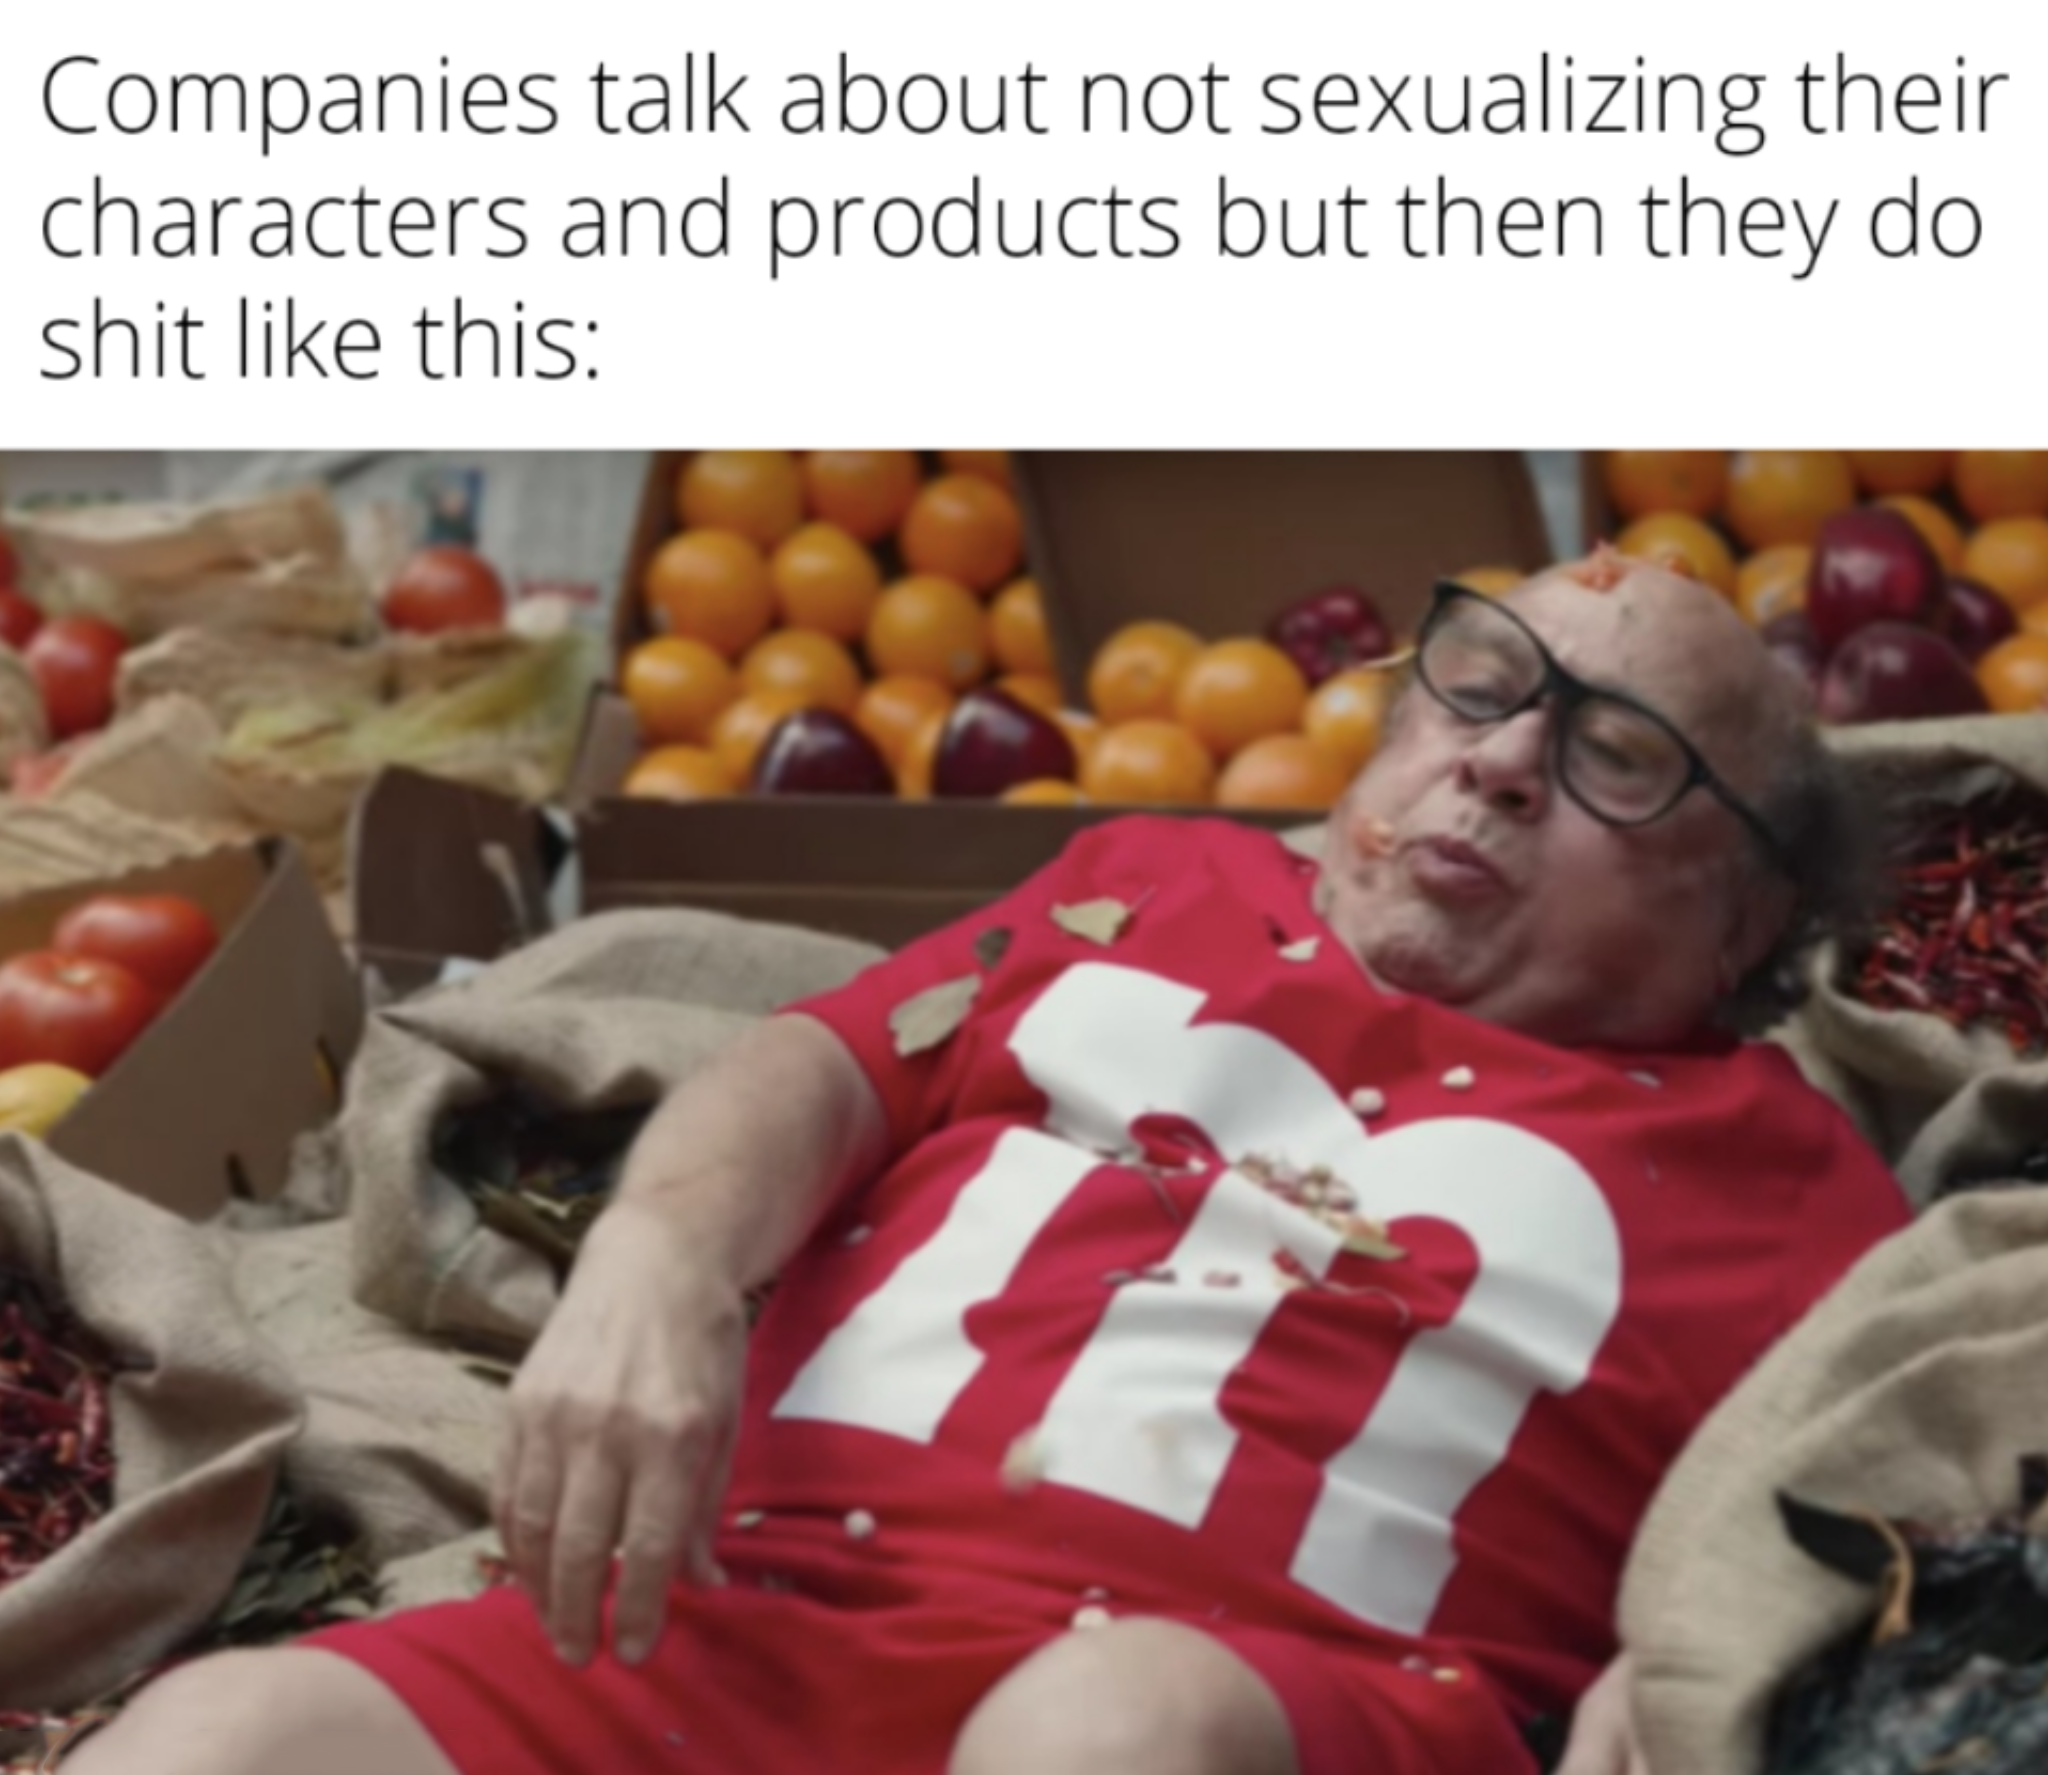 funny memes - danny devito m&m commercial - Companies talk about not sexualizing their characters and products but then they do shit this m